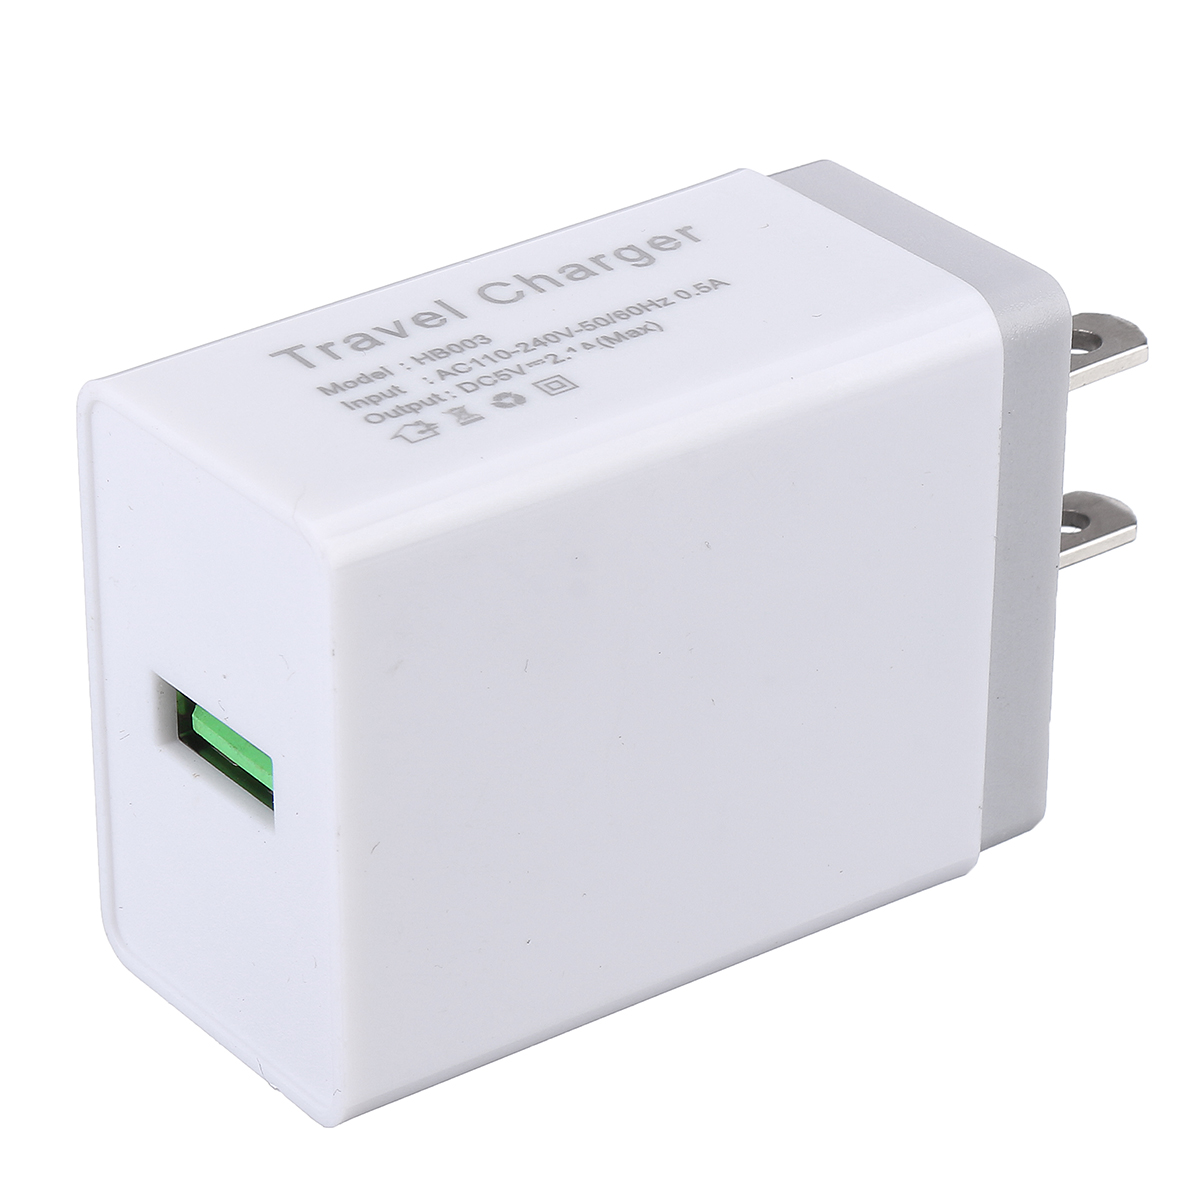 Universal-5V-21A-Lamp-Power-Travel-Charger-US-Standard-Plug-USB-Adapter-1620556-8